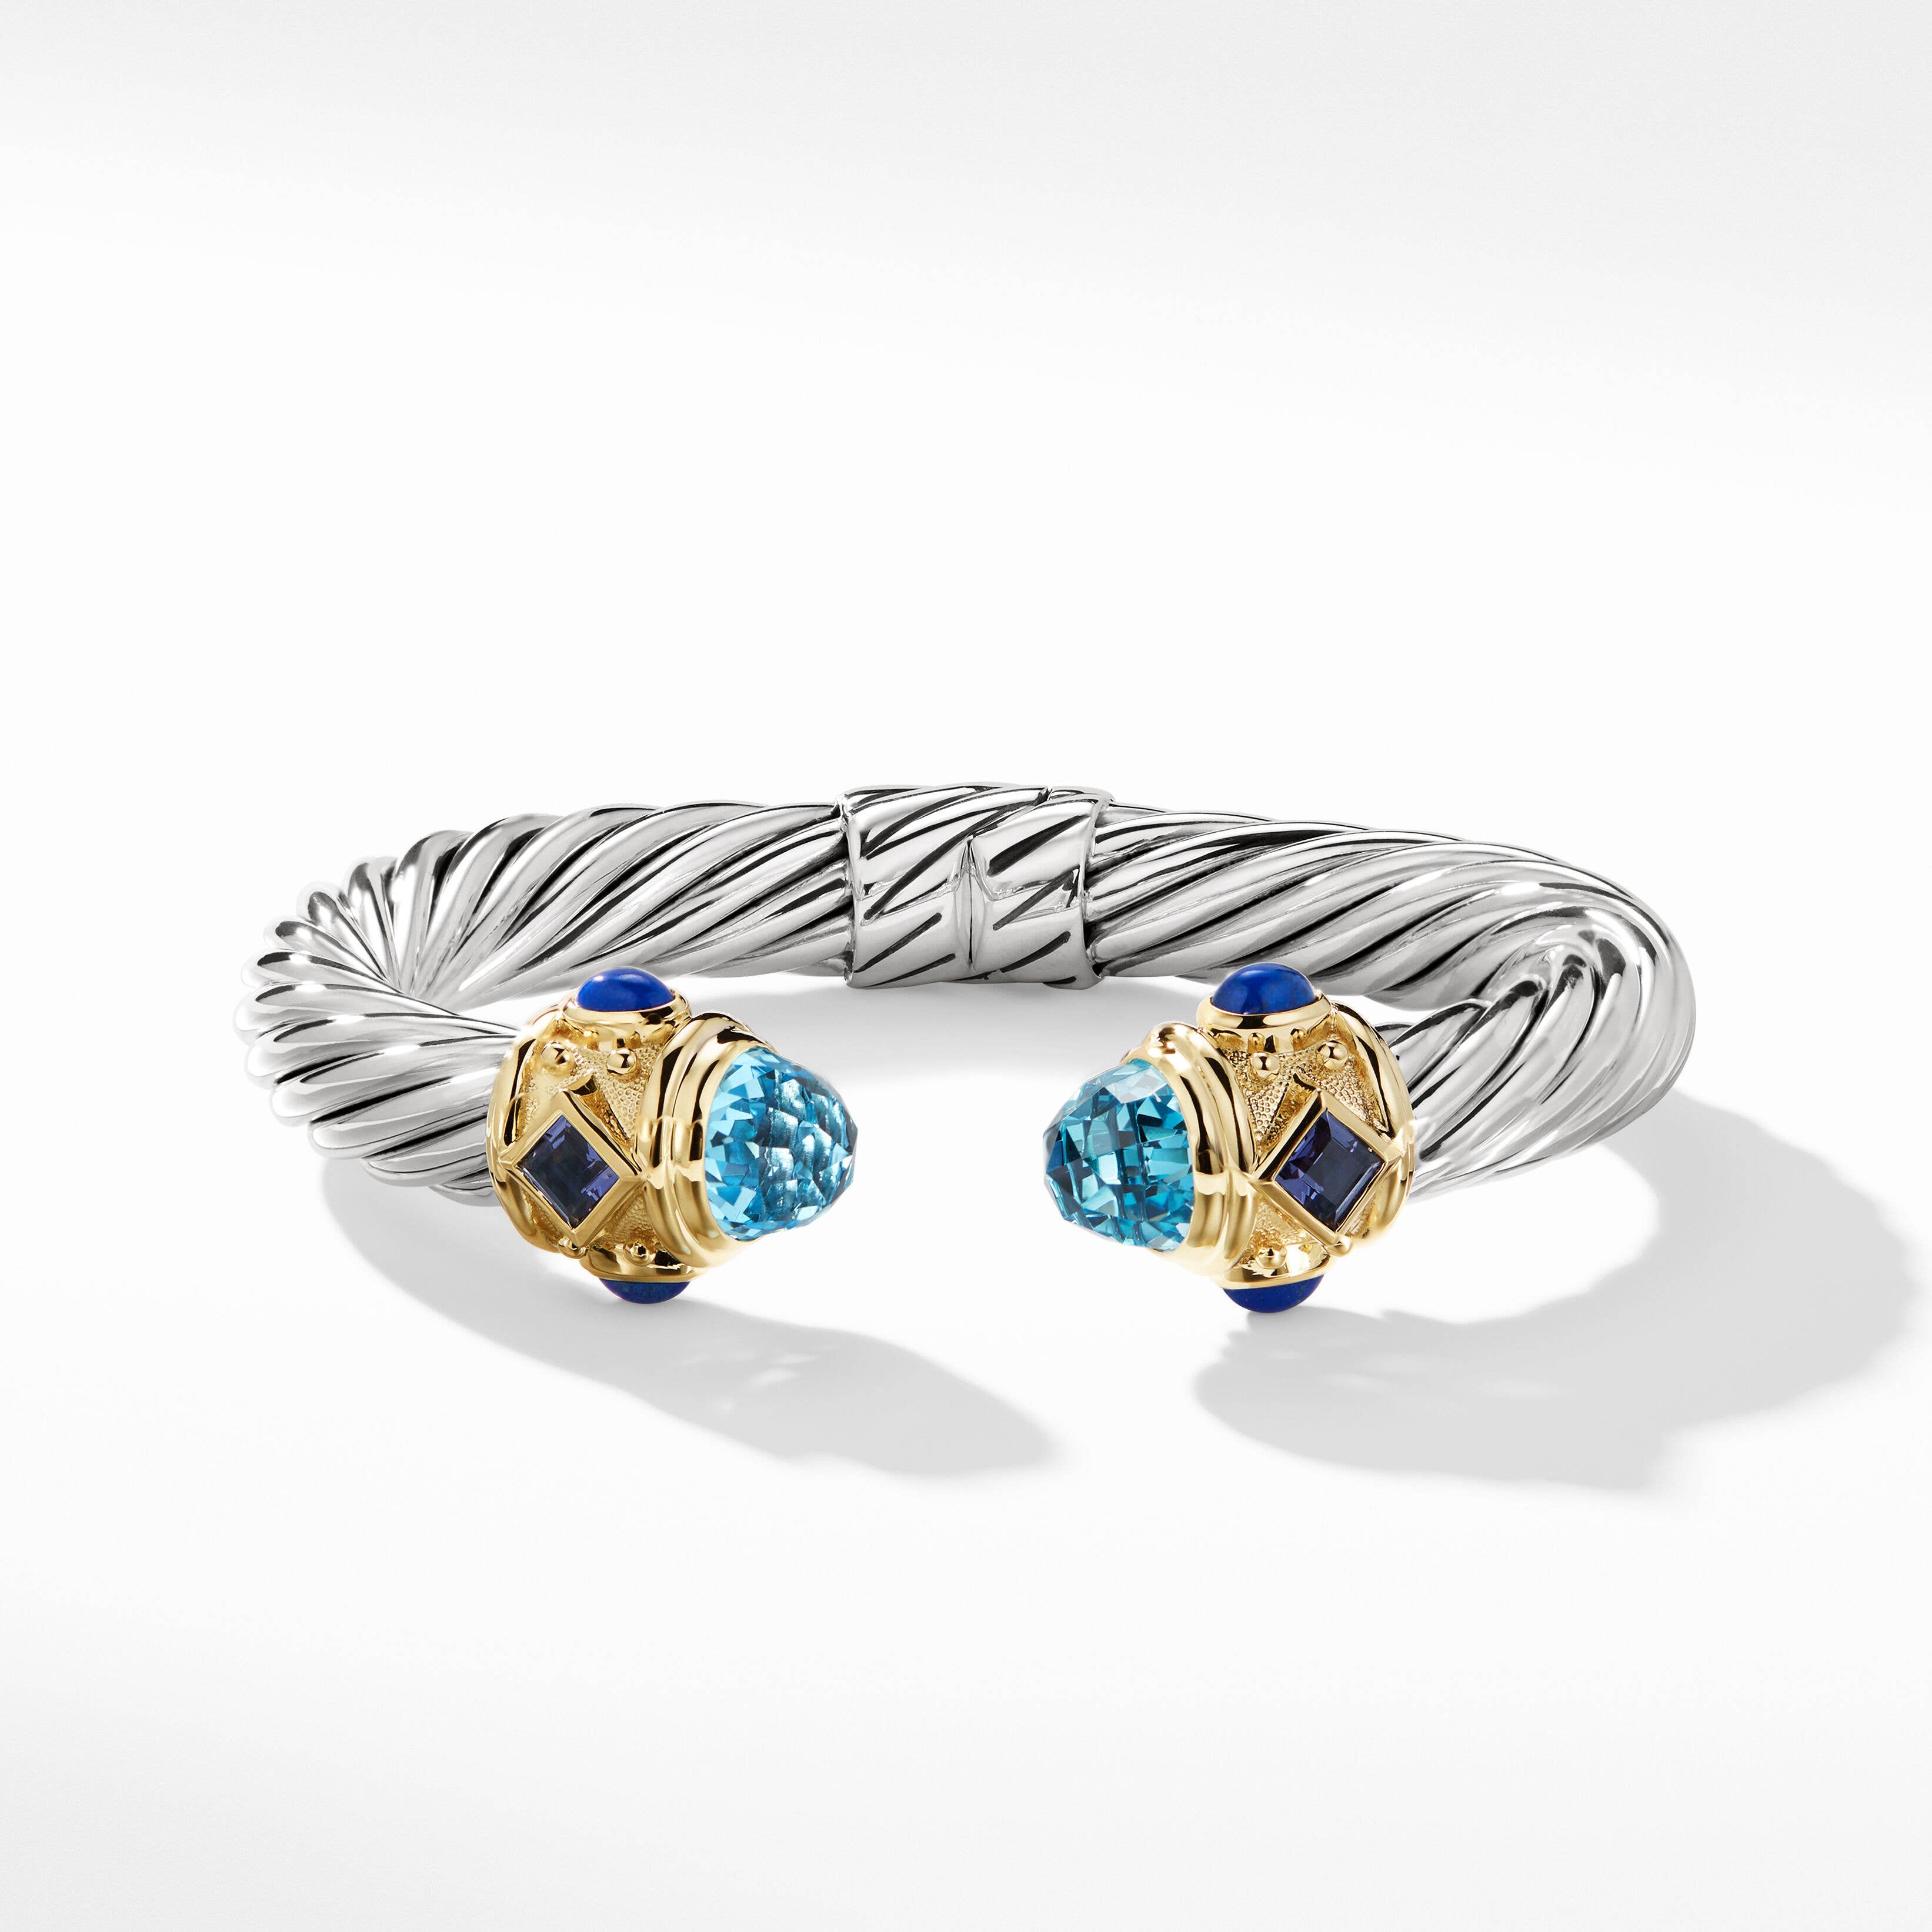 Renaissance Bracelet in Sterling Silver with Blue Topaz, Iolite, Lapis and 14K Yellow Gold